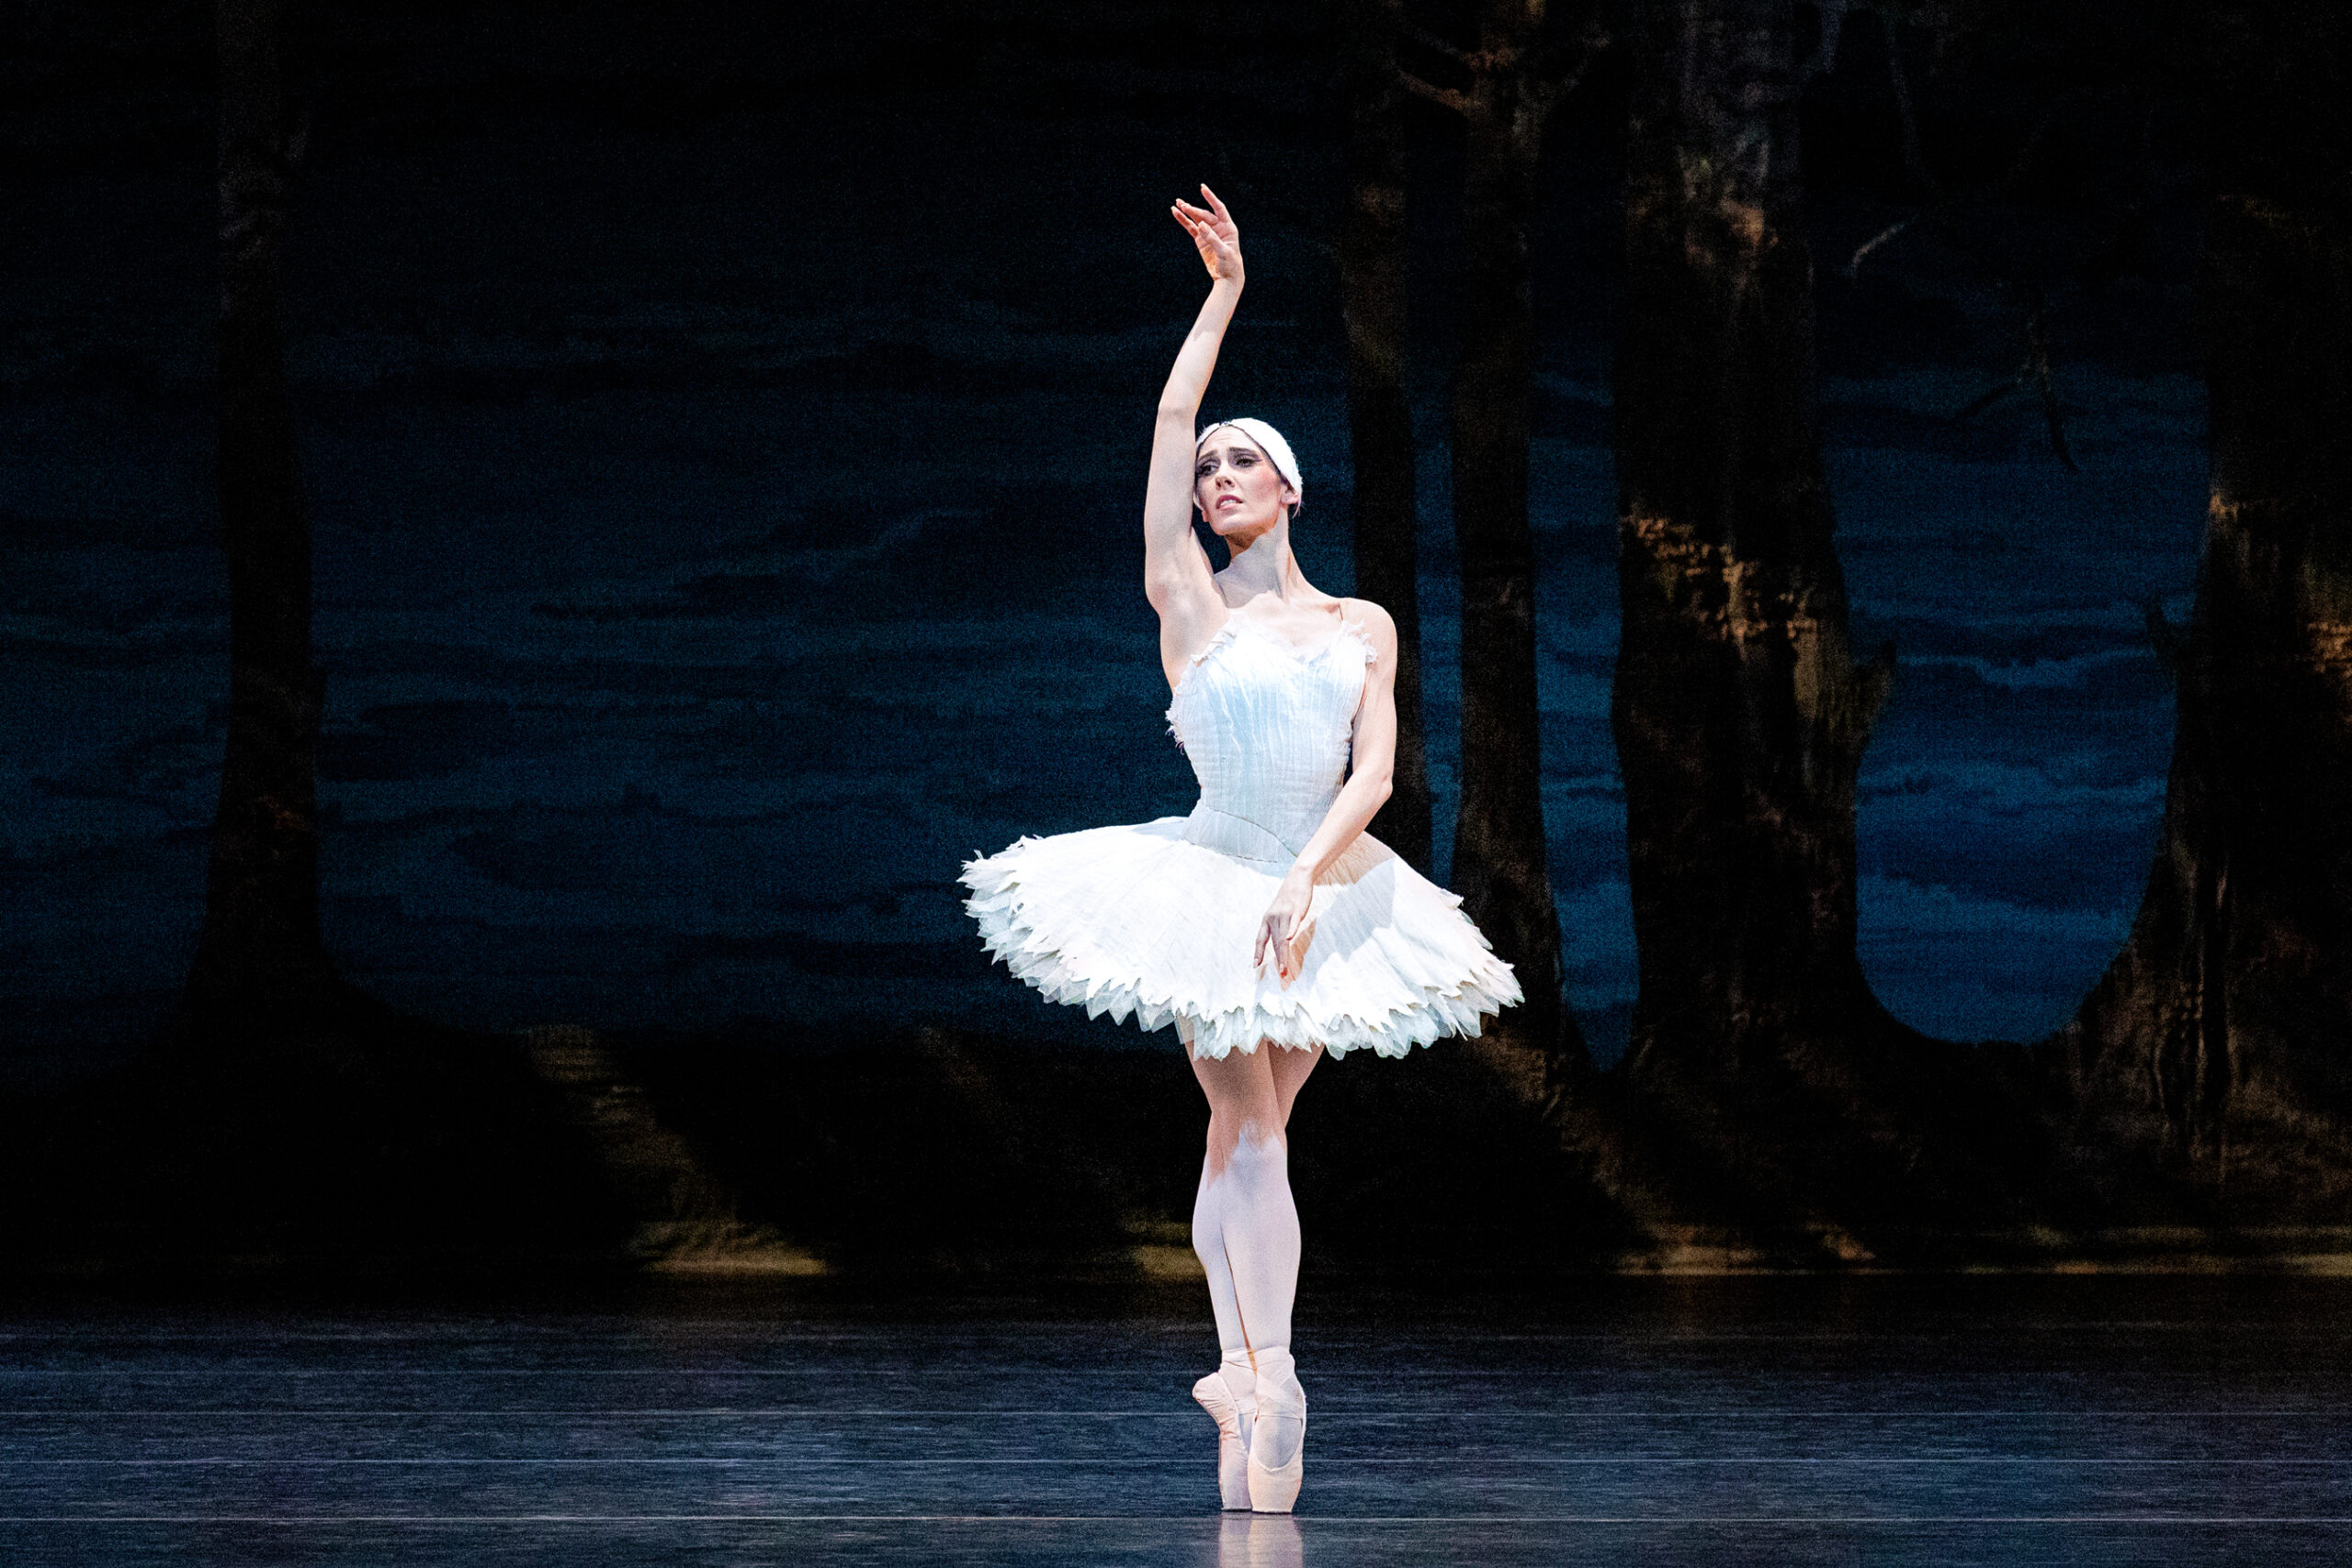 During a performance of Swan Lake, Backanne Sisk stands center stage in sus-sous on pointe, her right arm held high above her head, palm facing out, and her left arm low across her body. She turns her head towards her right arm. She wears a white tutu and feathered headpiece and dances in front of a dark backdrop showing a lakeside scene.